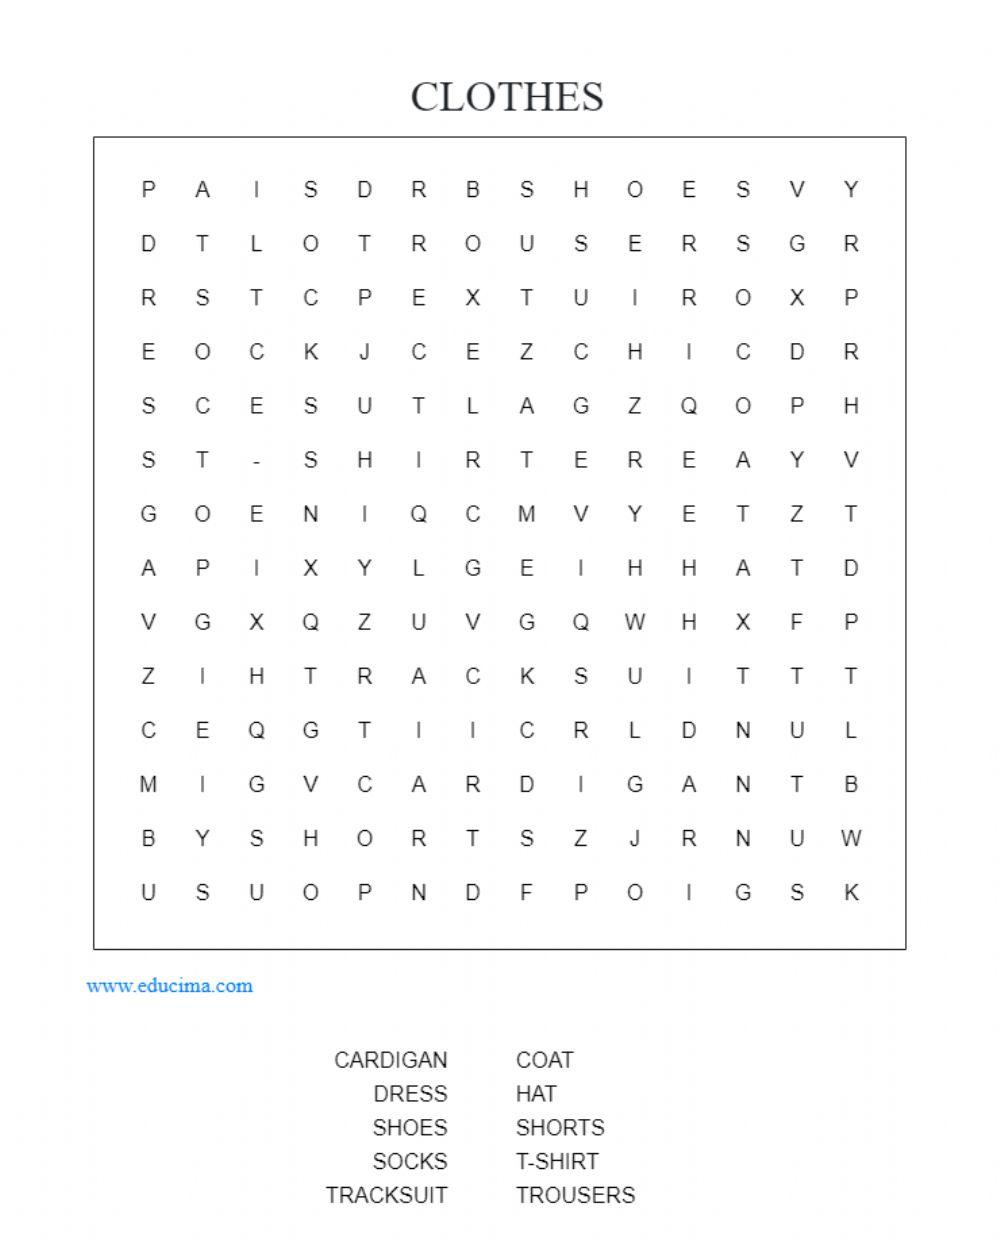 Clothes: wordsearch